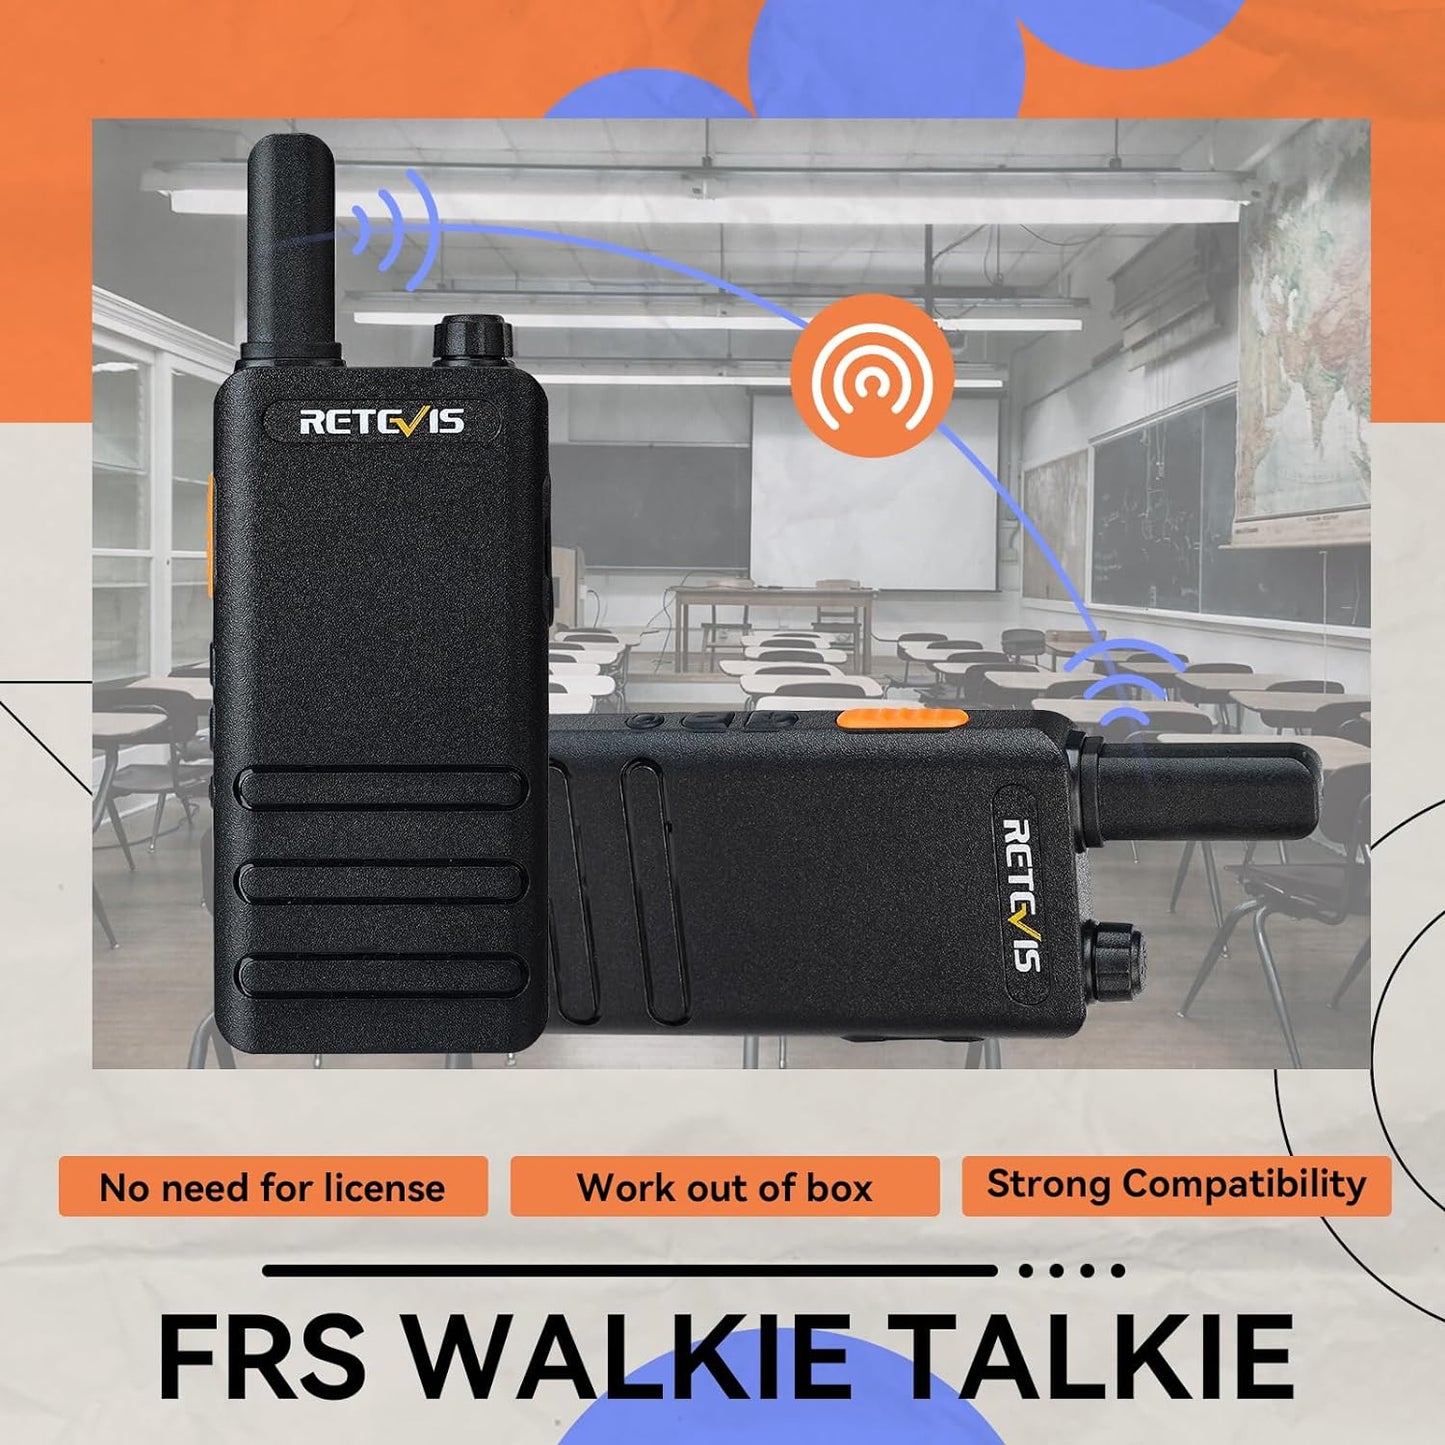 Retevis RT22P 2 Way Radios with Earpiece, New Version RT22,Portable FRS Two-Way Radios,1620mAh Battery,VOX Handsfree,Rechargeable Walkie Talkies for Adu